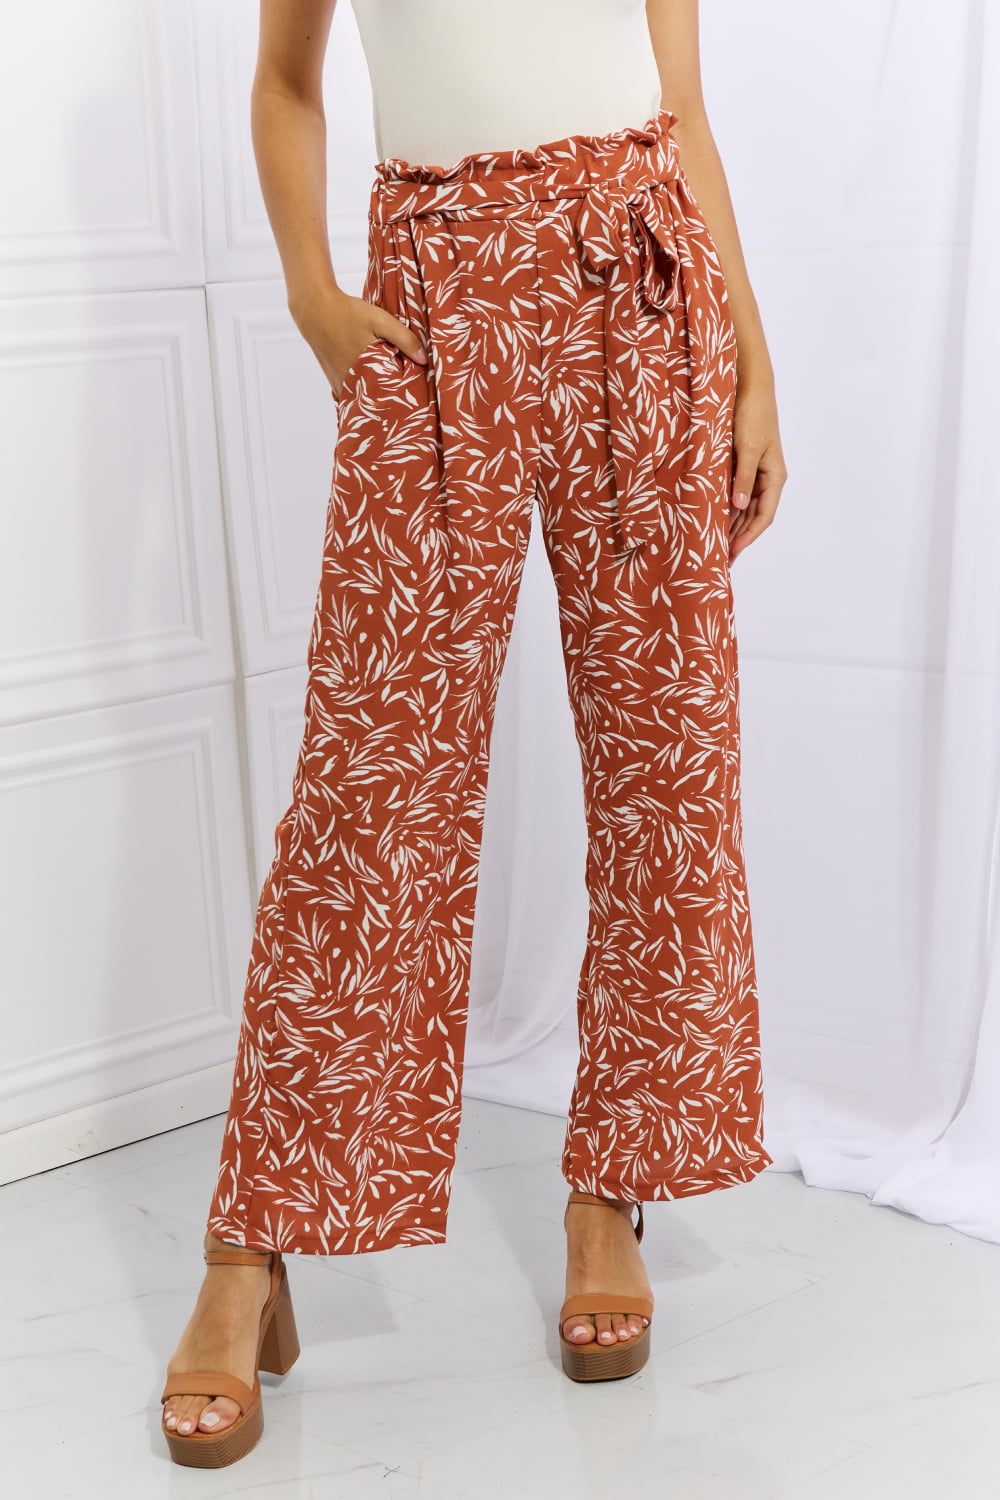 Light Gray Heimish Right Angle Full Size Geometric Printed Pants in Red Orange Sentient Beauty Fashions Apparel &amp; Accessories